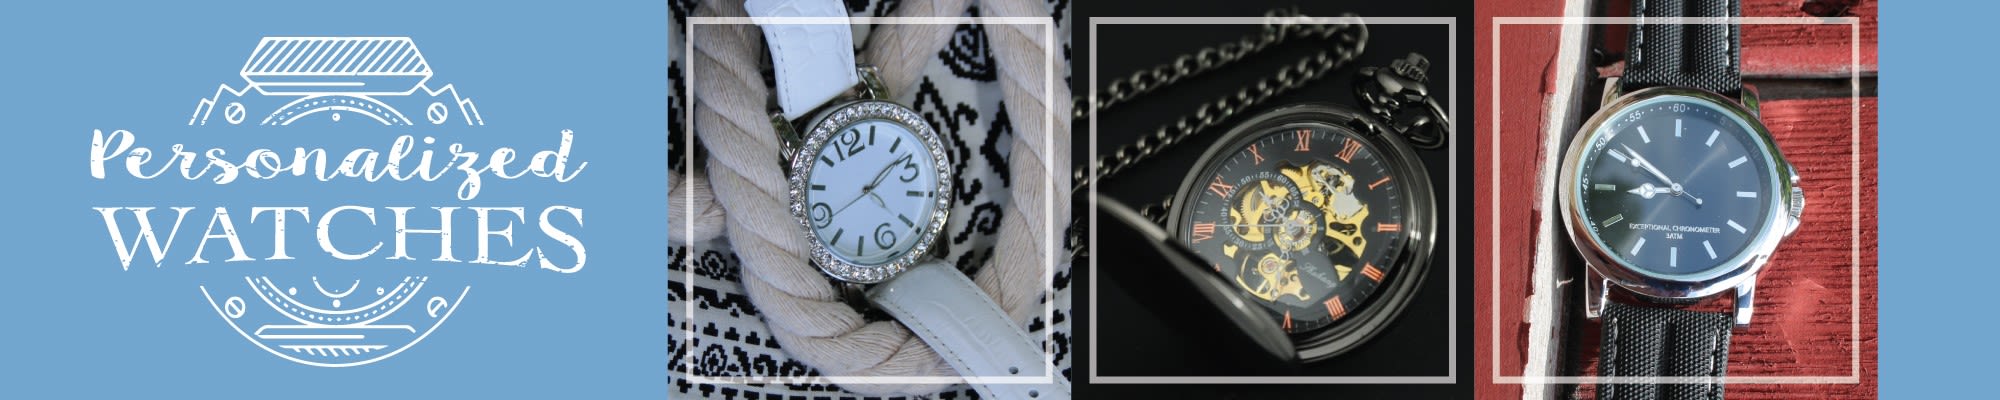 Engraved Watches for Custom Birthday, Anniversary & Father's Day Gifts